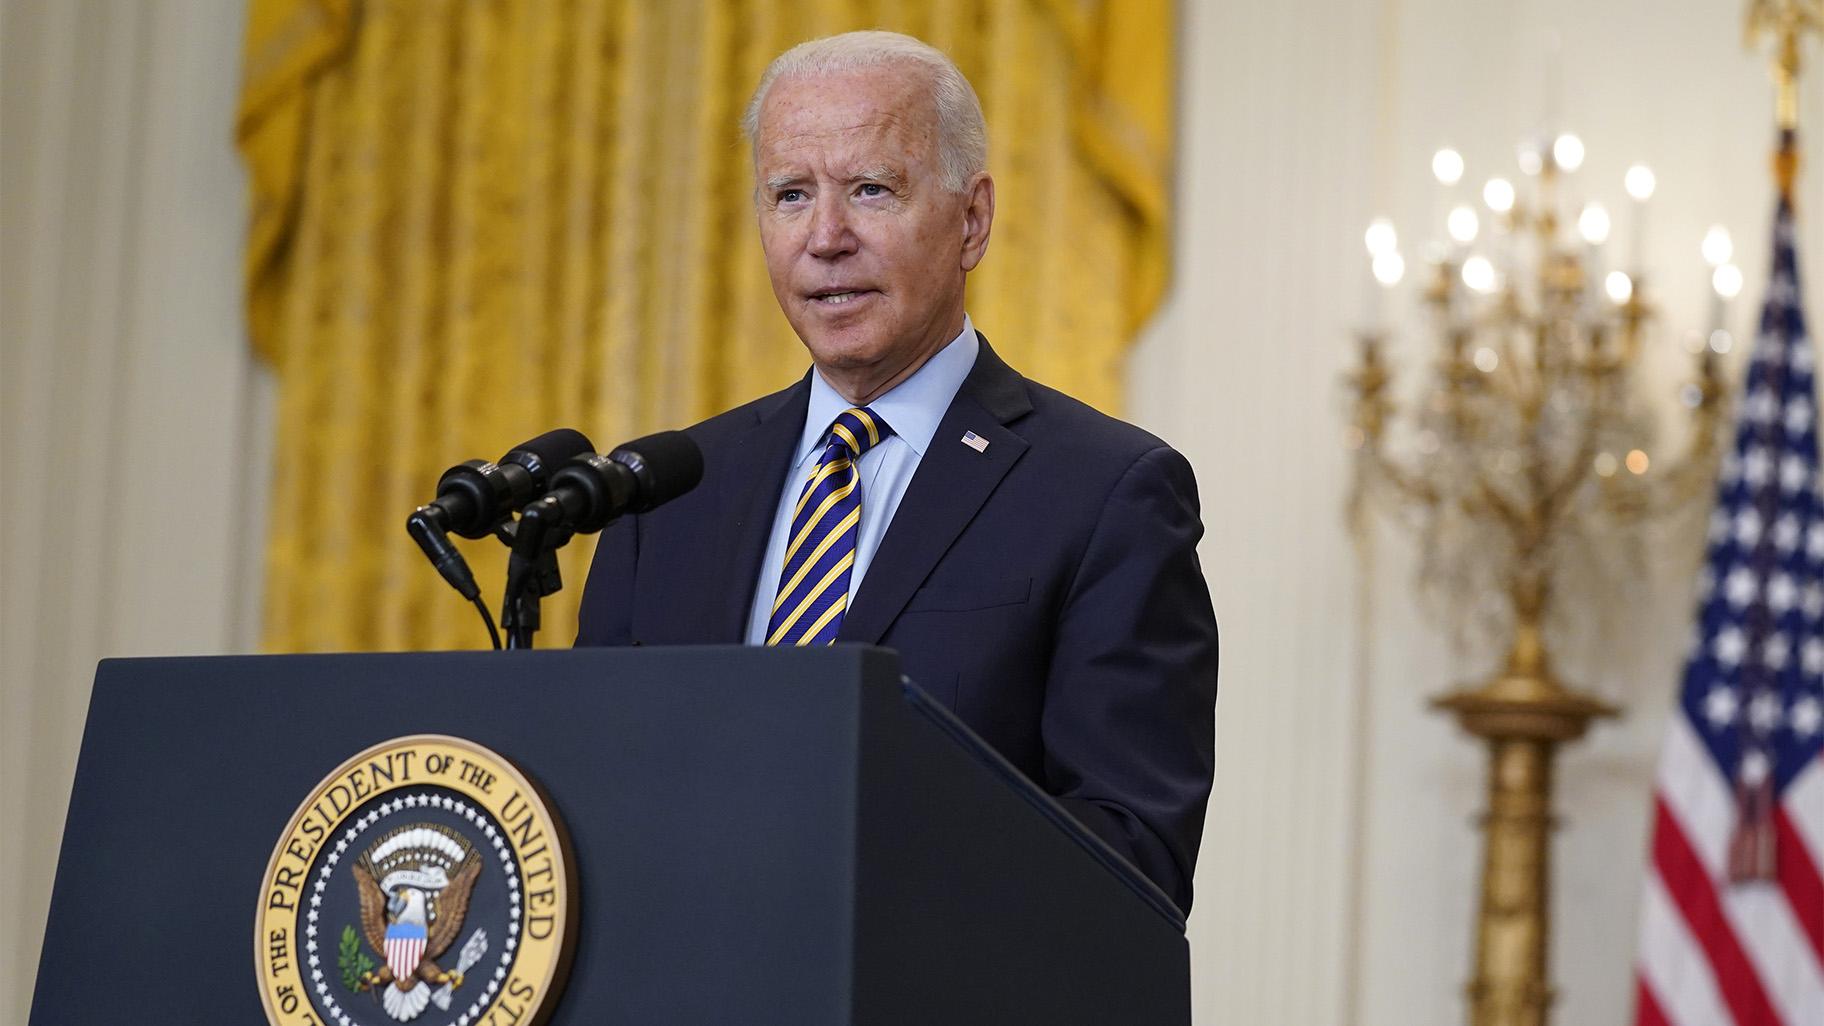 President Joe Biden speaks about the American troop withdrawal from Afghanistan, in the East Room of the White House, Thursday, July 8, 2021, in Washington. (AP Photo / Evan Vucci)